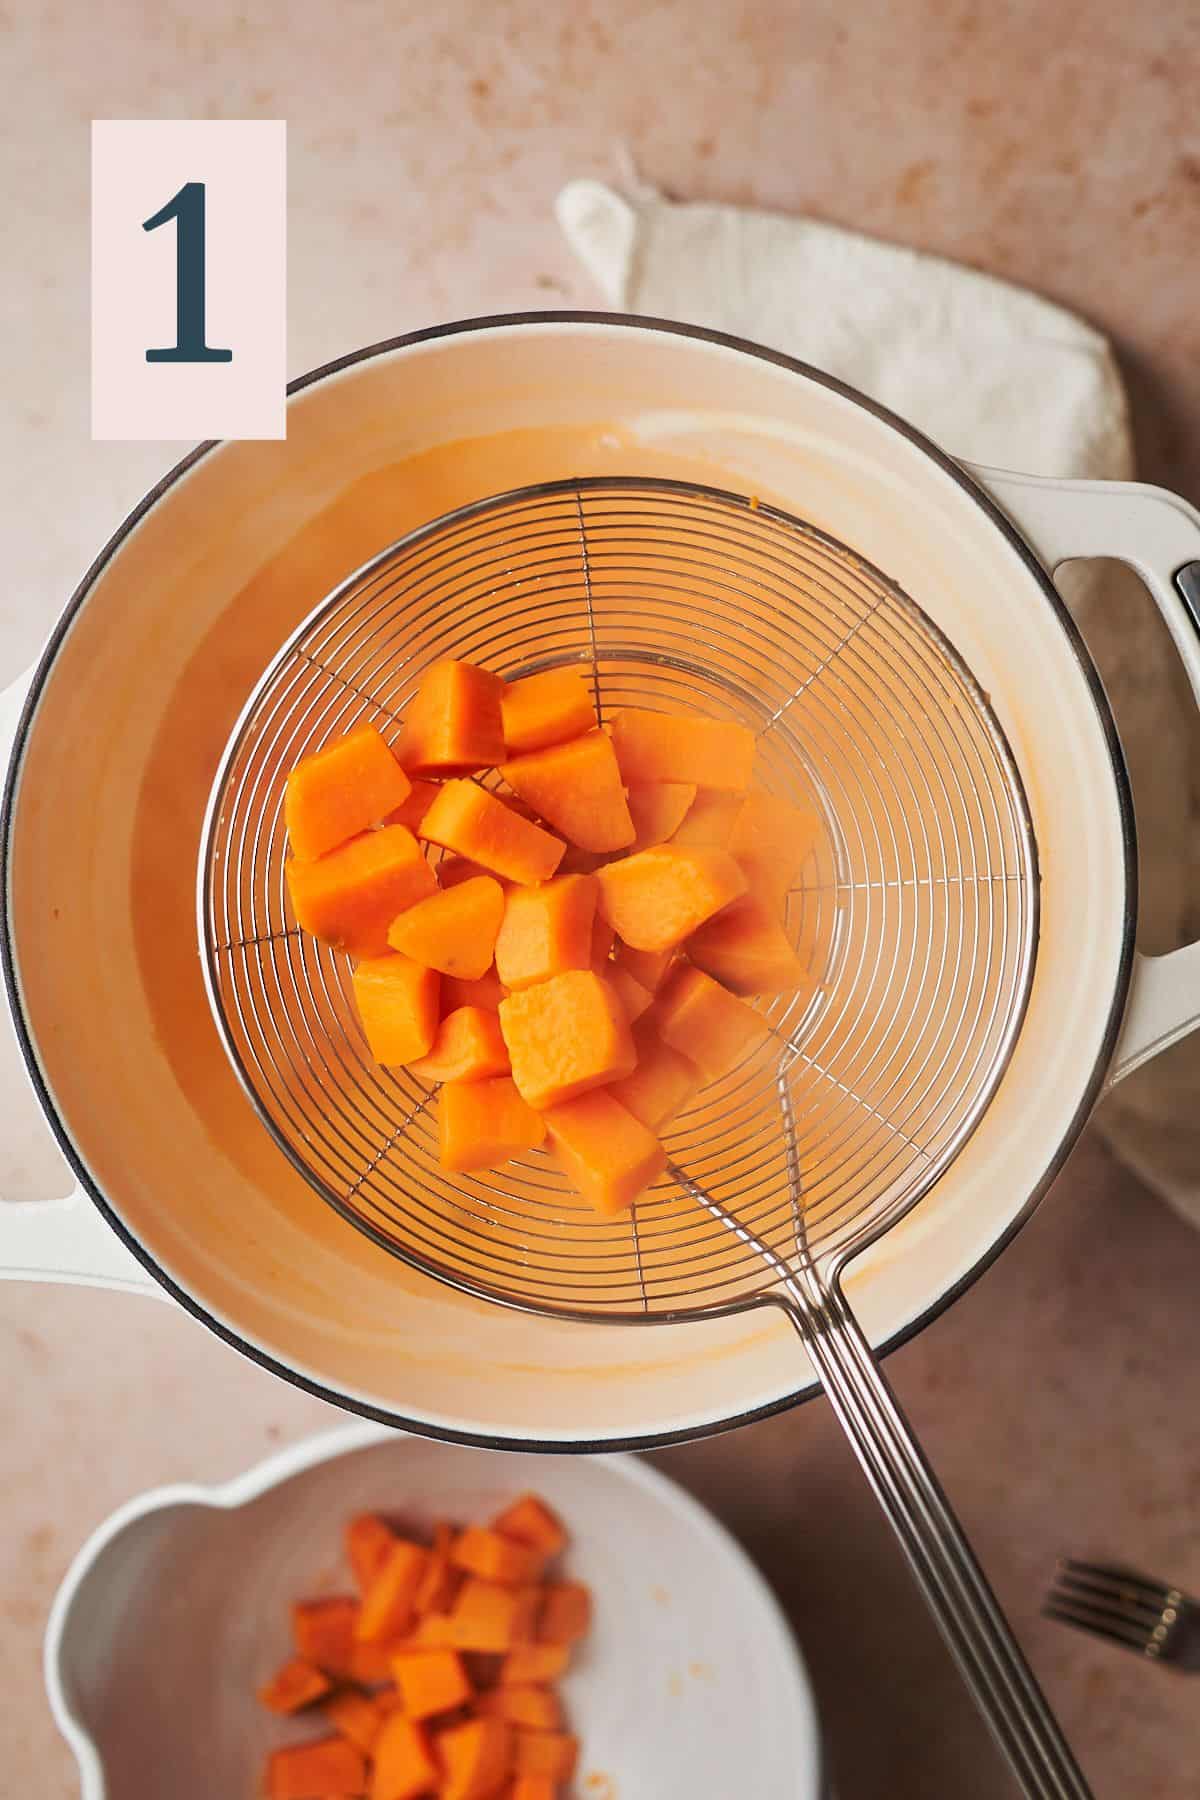 boiled sweet potatoes fin a skimmer coming out of water from a pot. 